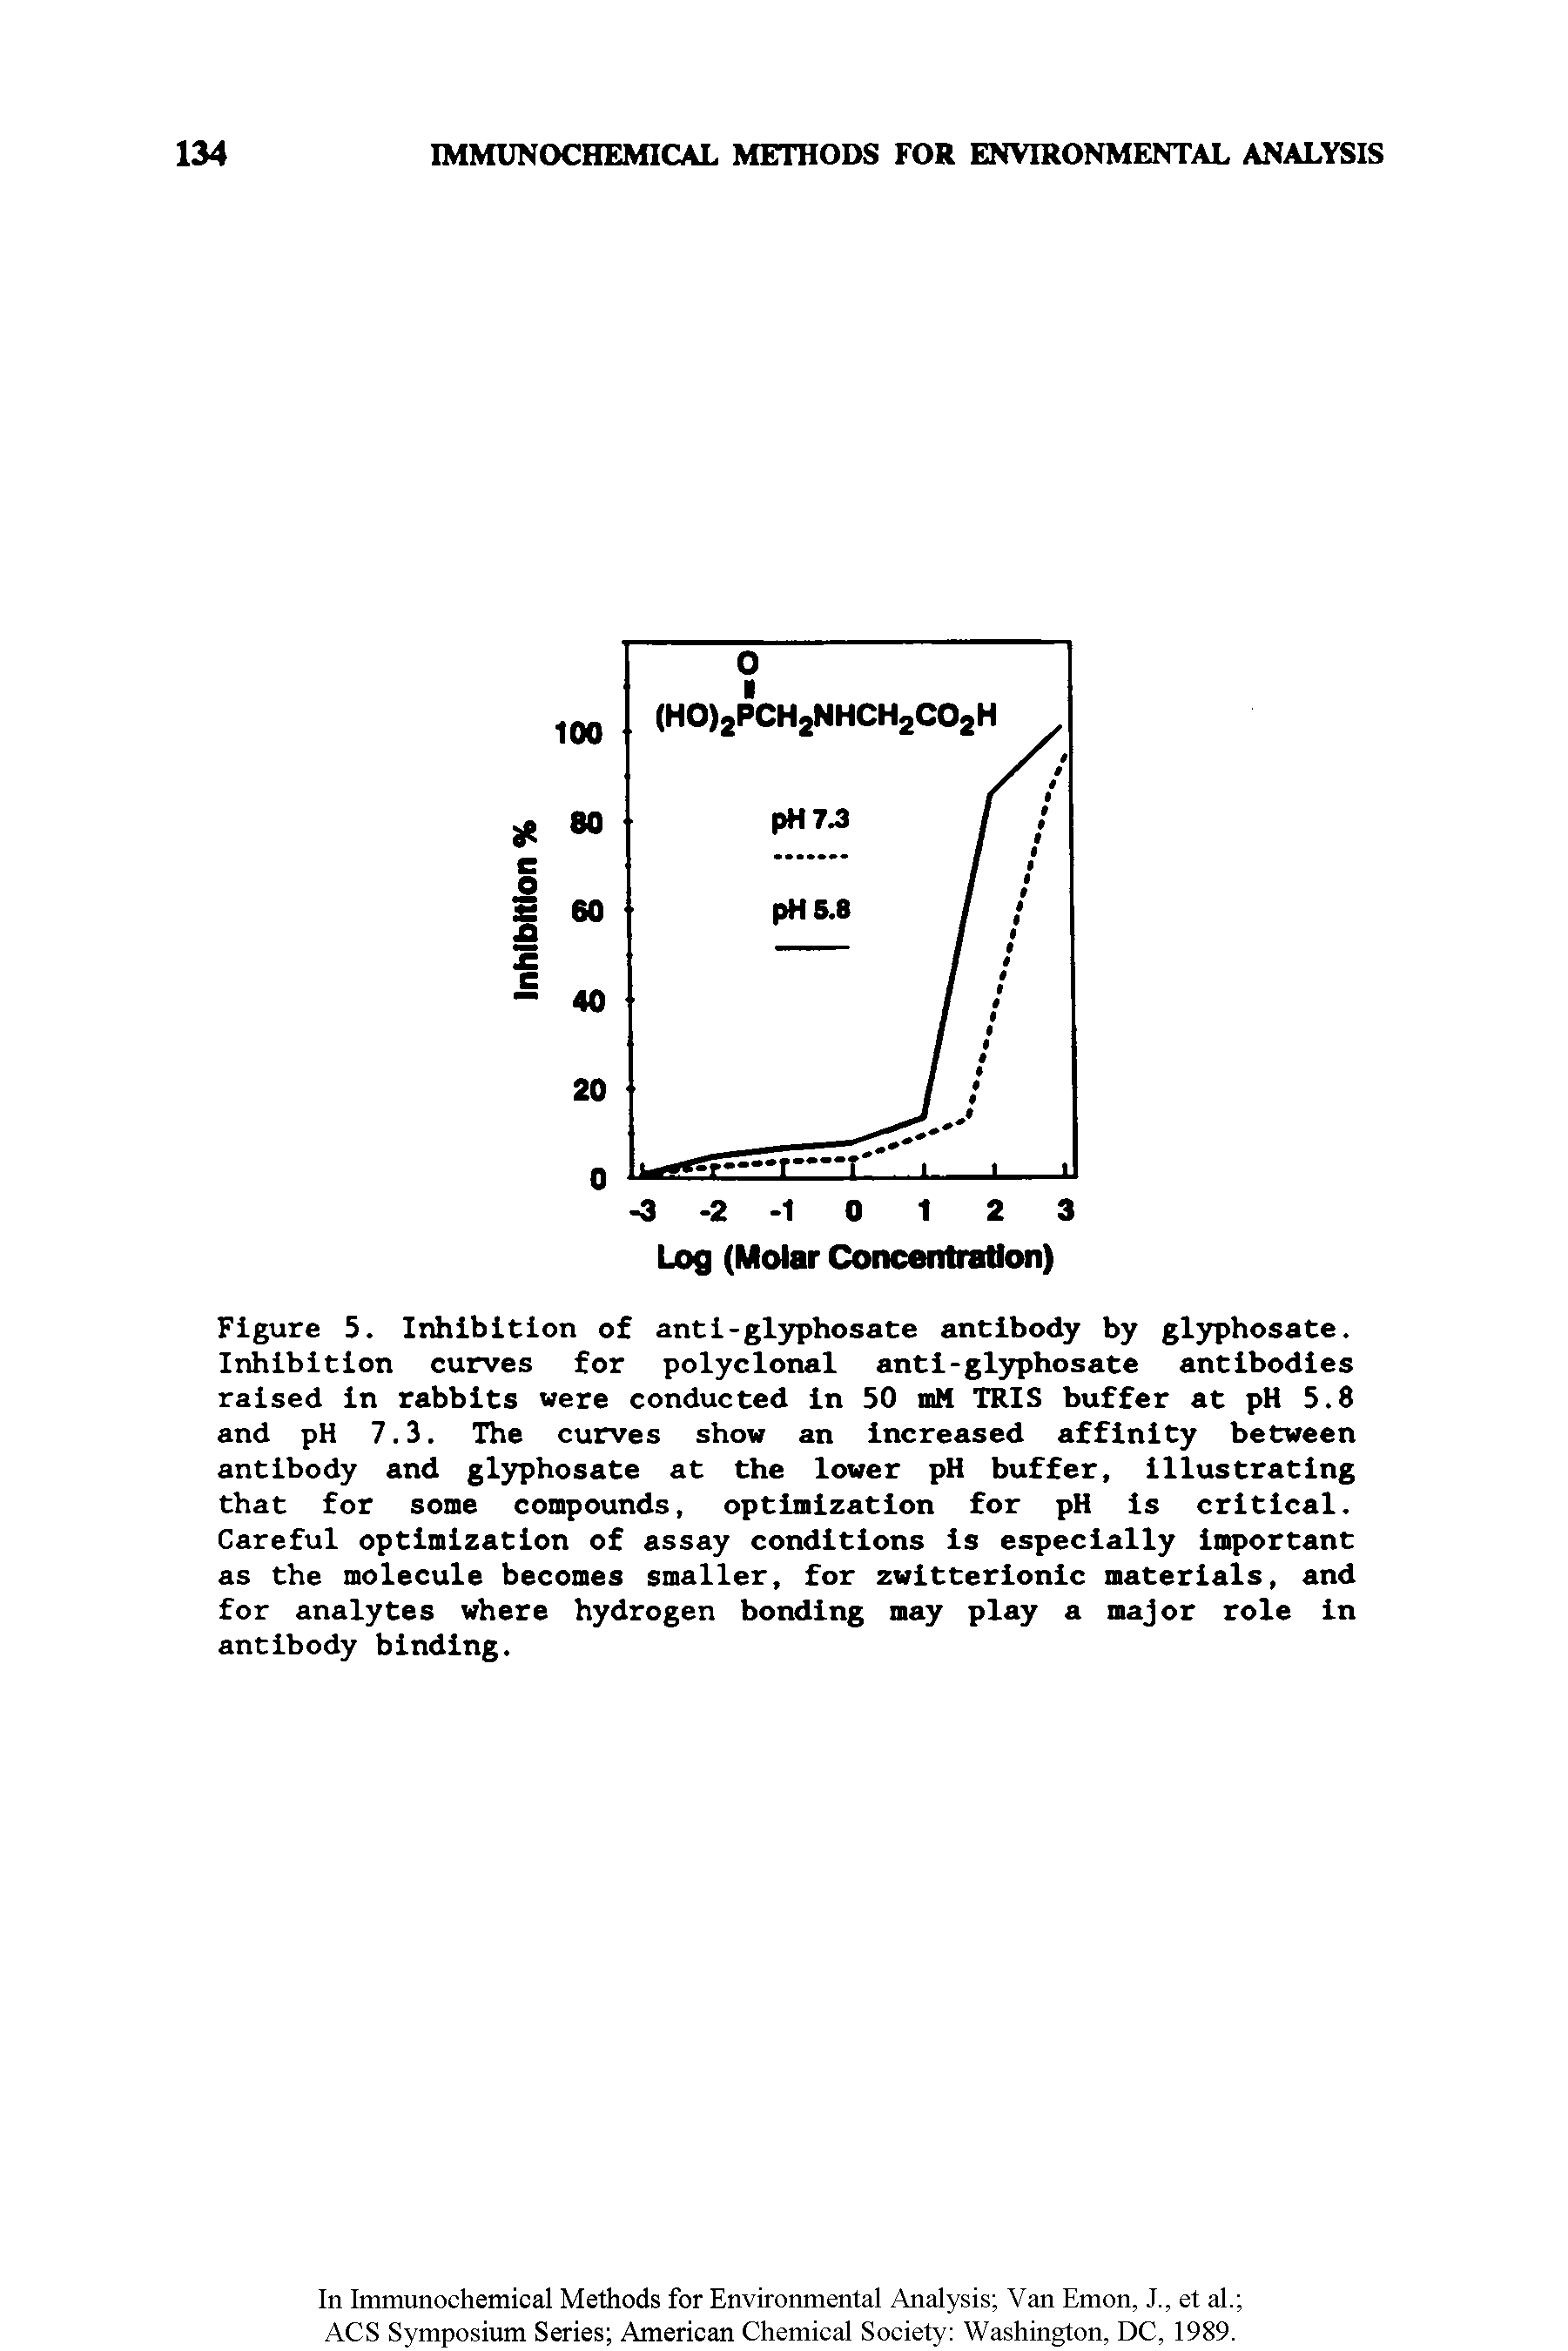 Figure 5. Inhibition of anti-glyphosate antibody by glyphosate. Inhibition curves for polyclonal anti-glyphosate antibodies raised in rabbits were conducted in 50 mM TRIS buffer at pH 5.8 and pH 7.3. The curves show an increased affinity between antibody and glyphosate at the lower pH buffer, illustrating that for some compounds, optimization for pH is critical. Careful optimization of assay conditions is especially important as the molecule becomes smaller, for zwitterionic materials, and for analytes where hydrogen bonding may play a major role in antibody binding.